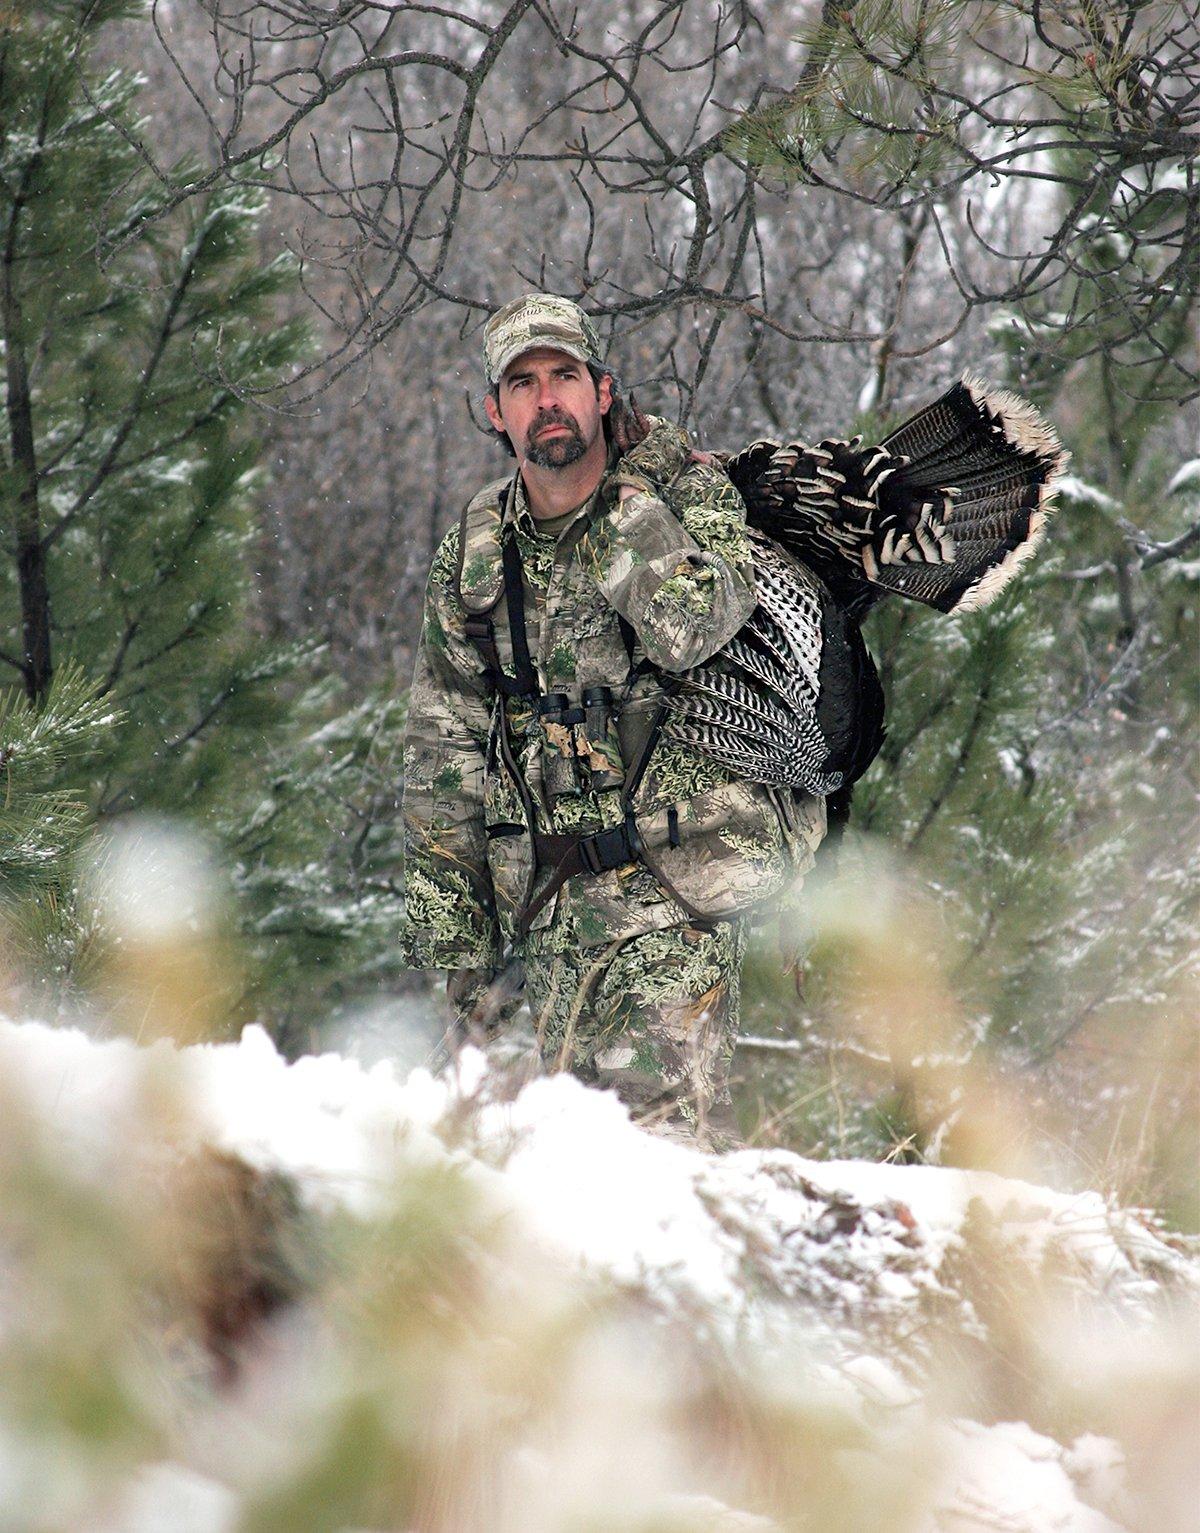 That's me thinking about lunch back at camp, with a Wyoming Merriam's on my shoulder. Image by John Hafner